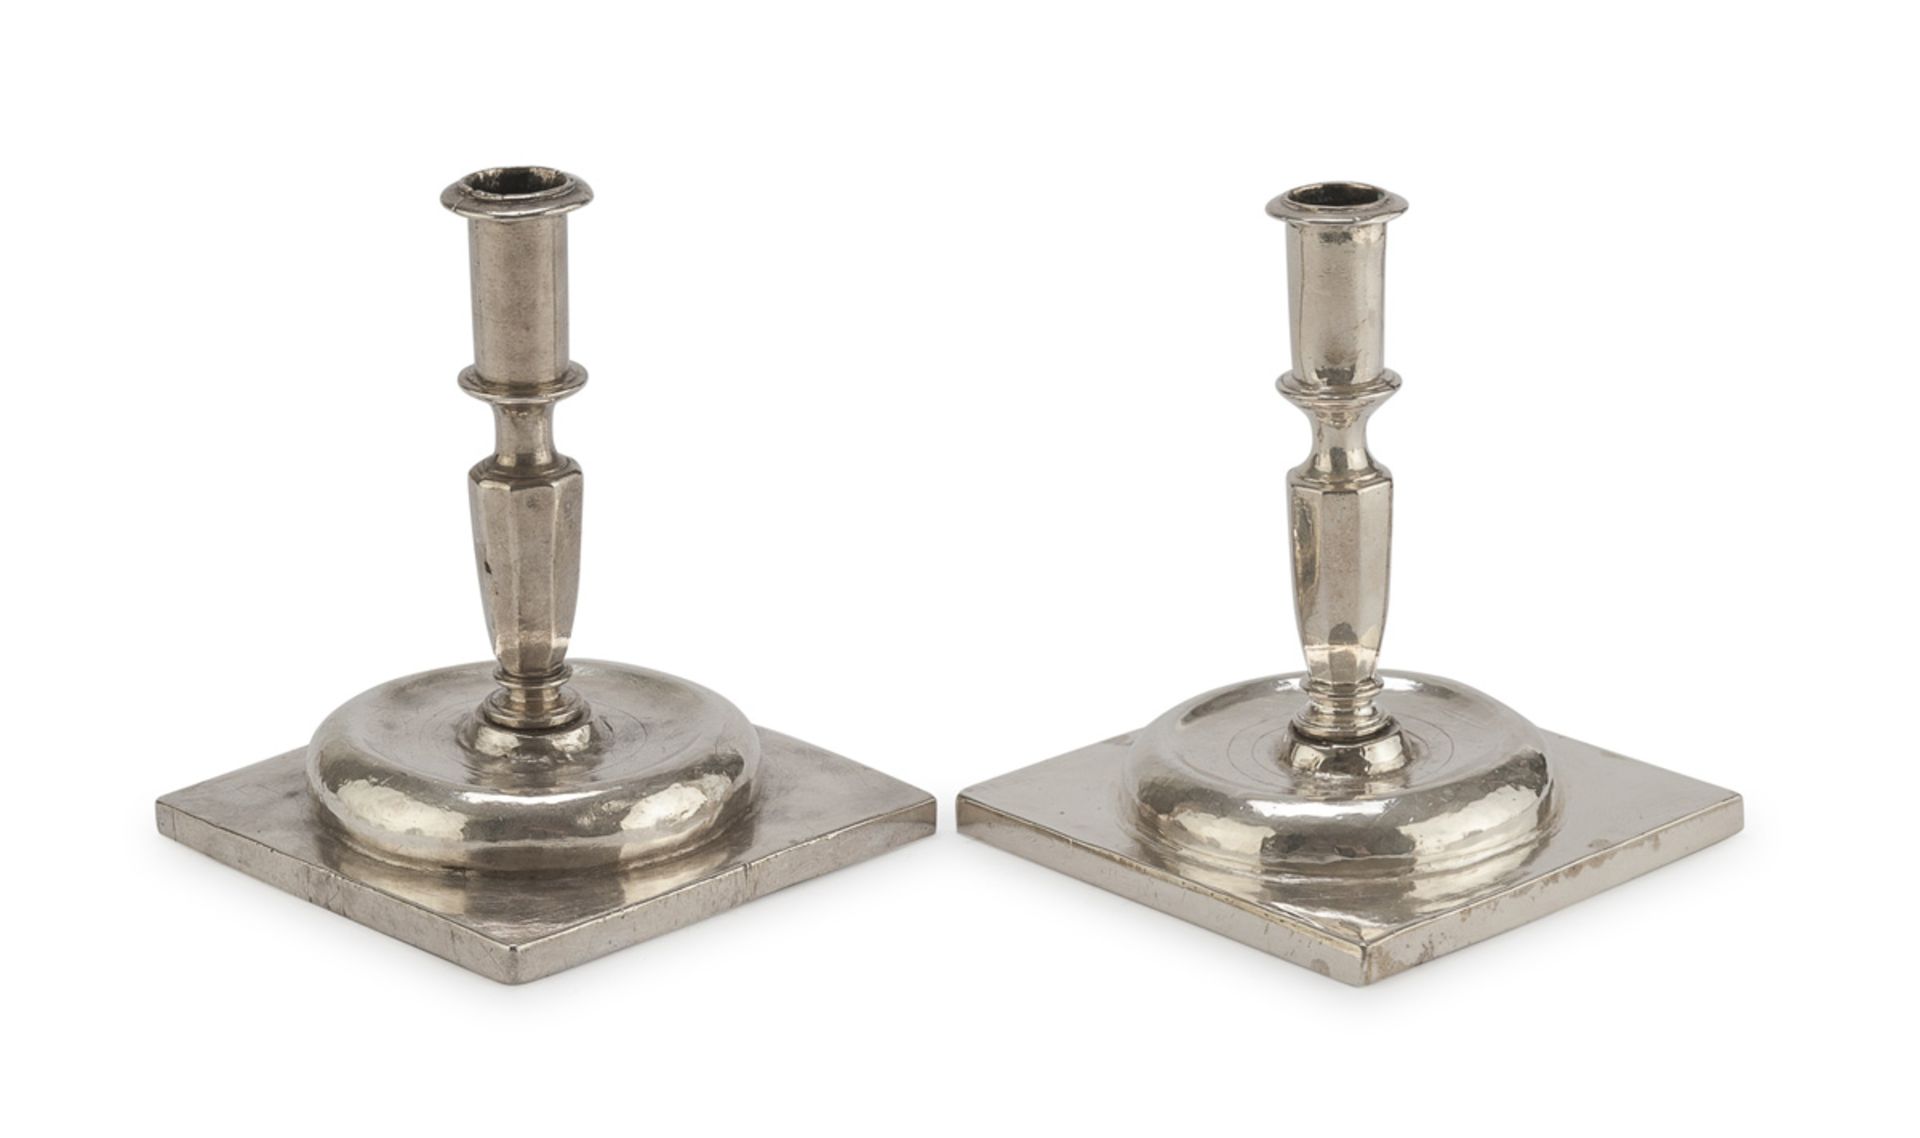 PAIR OF SILVER CANDLESTICKS 20TH CENTURY